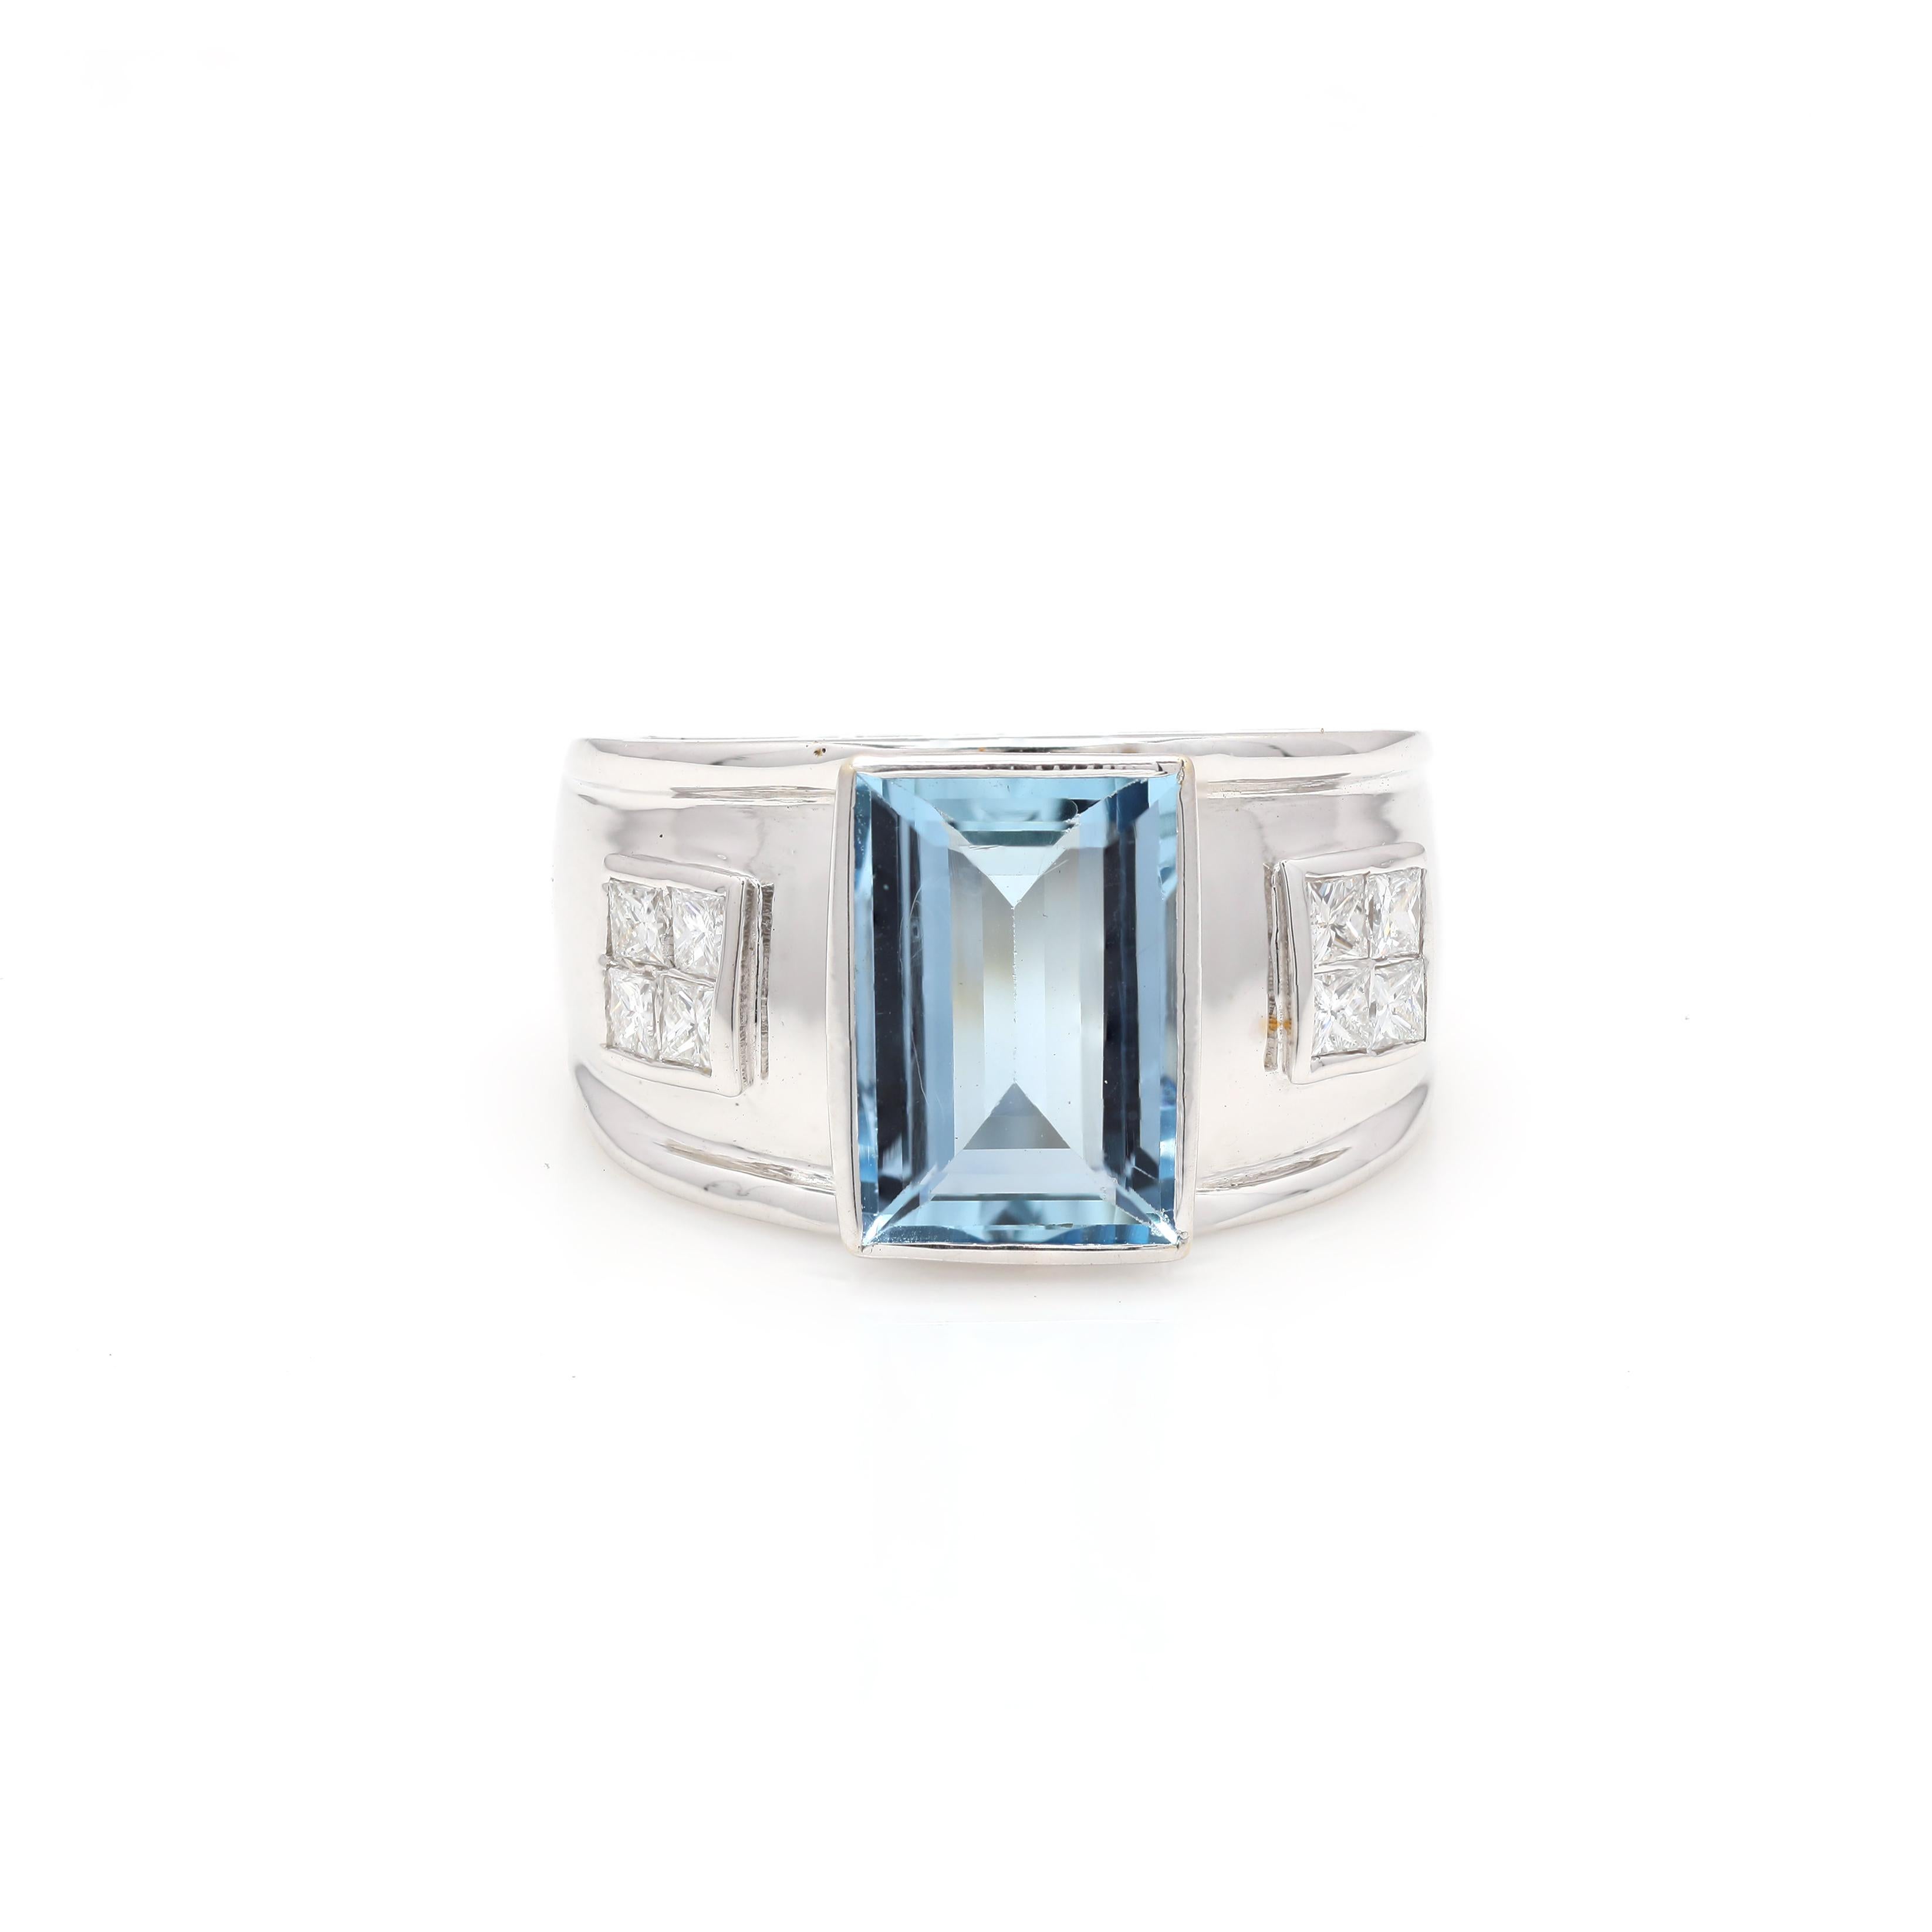 For Sale:  Statement 5.6 Carat Aquamarine Men's Ring with Diamonds in 18K White Gold 3